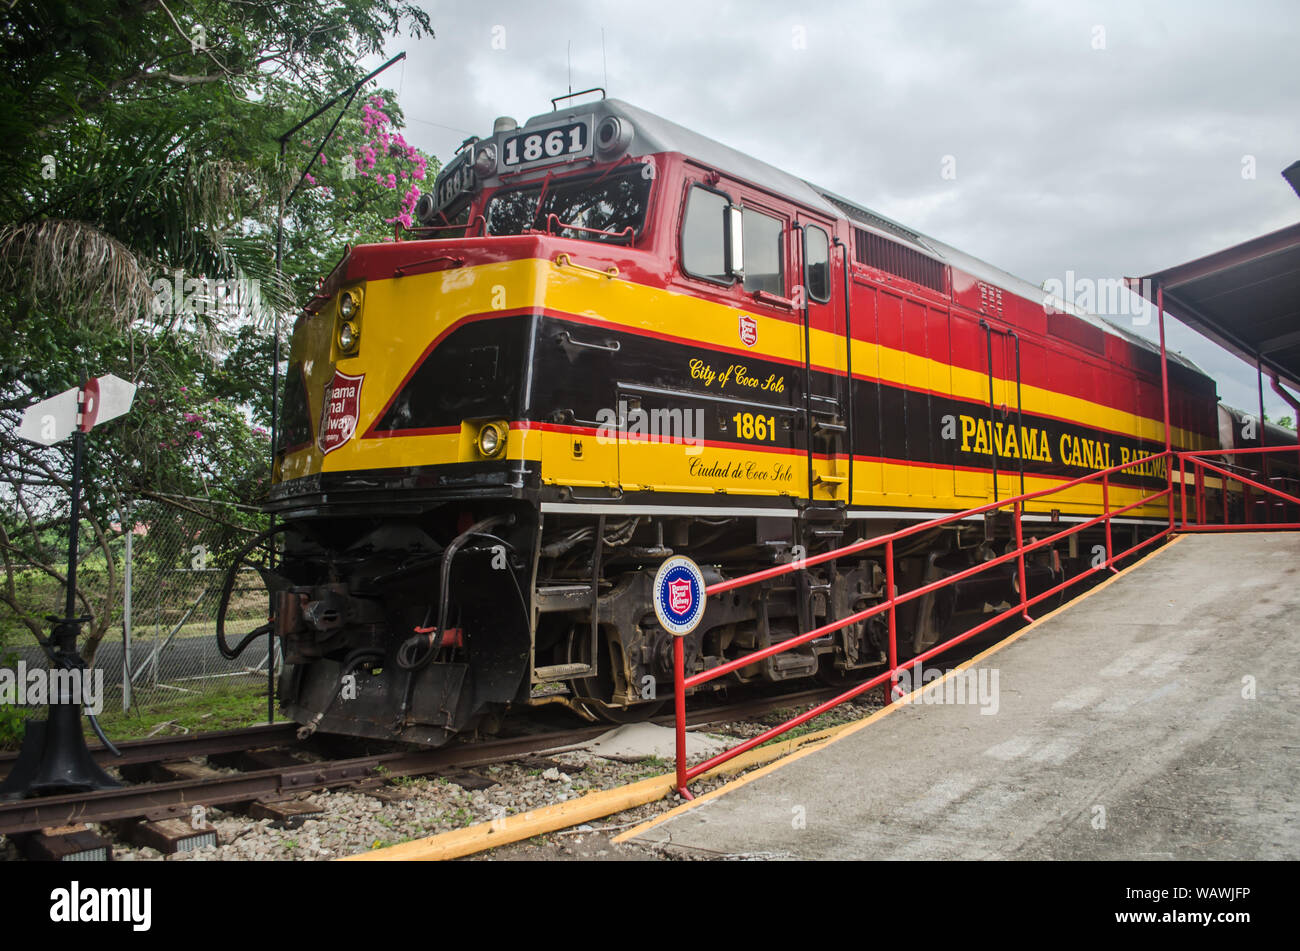 Panama Canal Railway in Corozal railway station. The Panama Canal Railway is a historic and significant railway that runs parallel to the Panama Canal Stock Photo